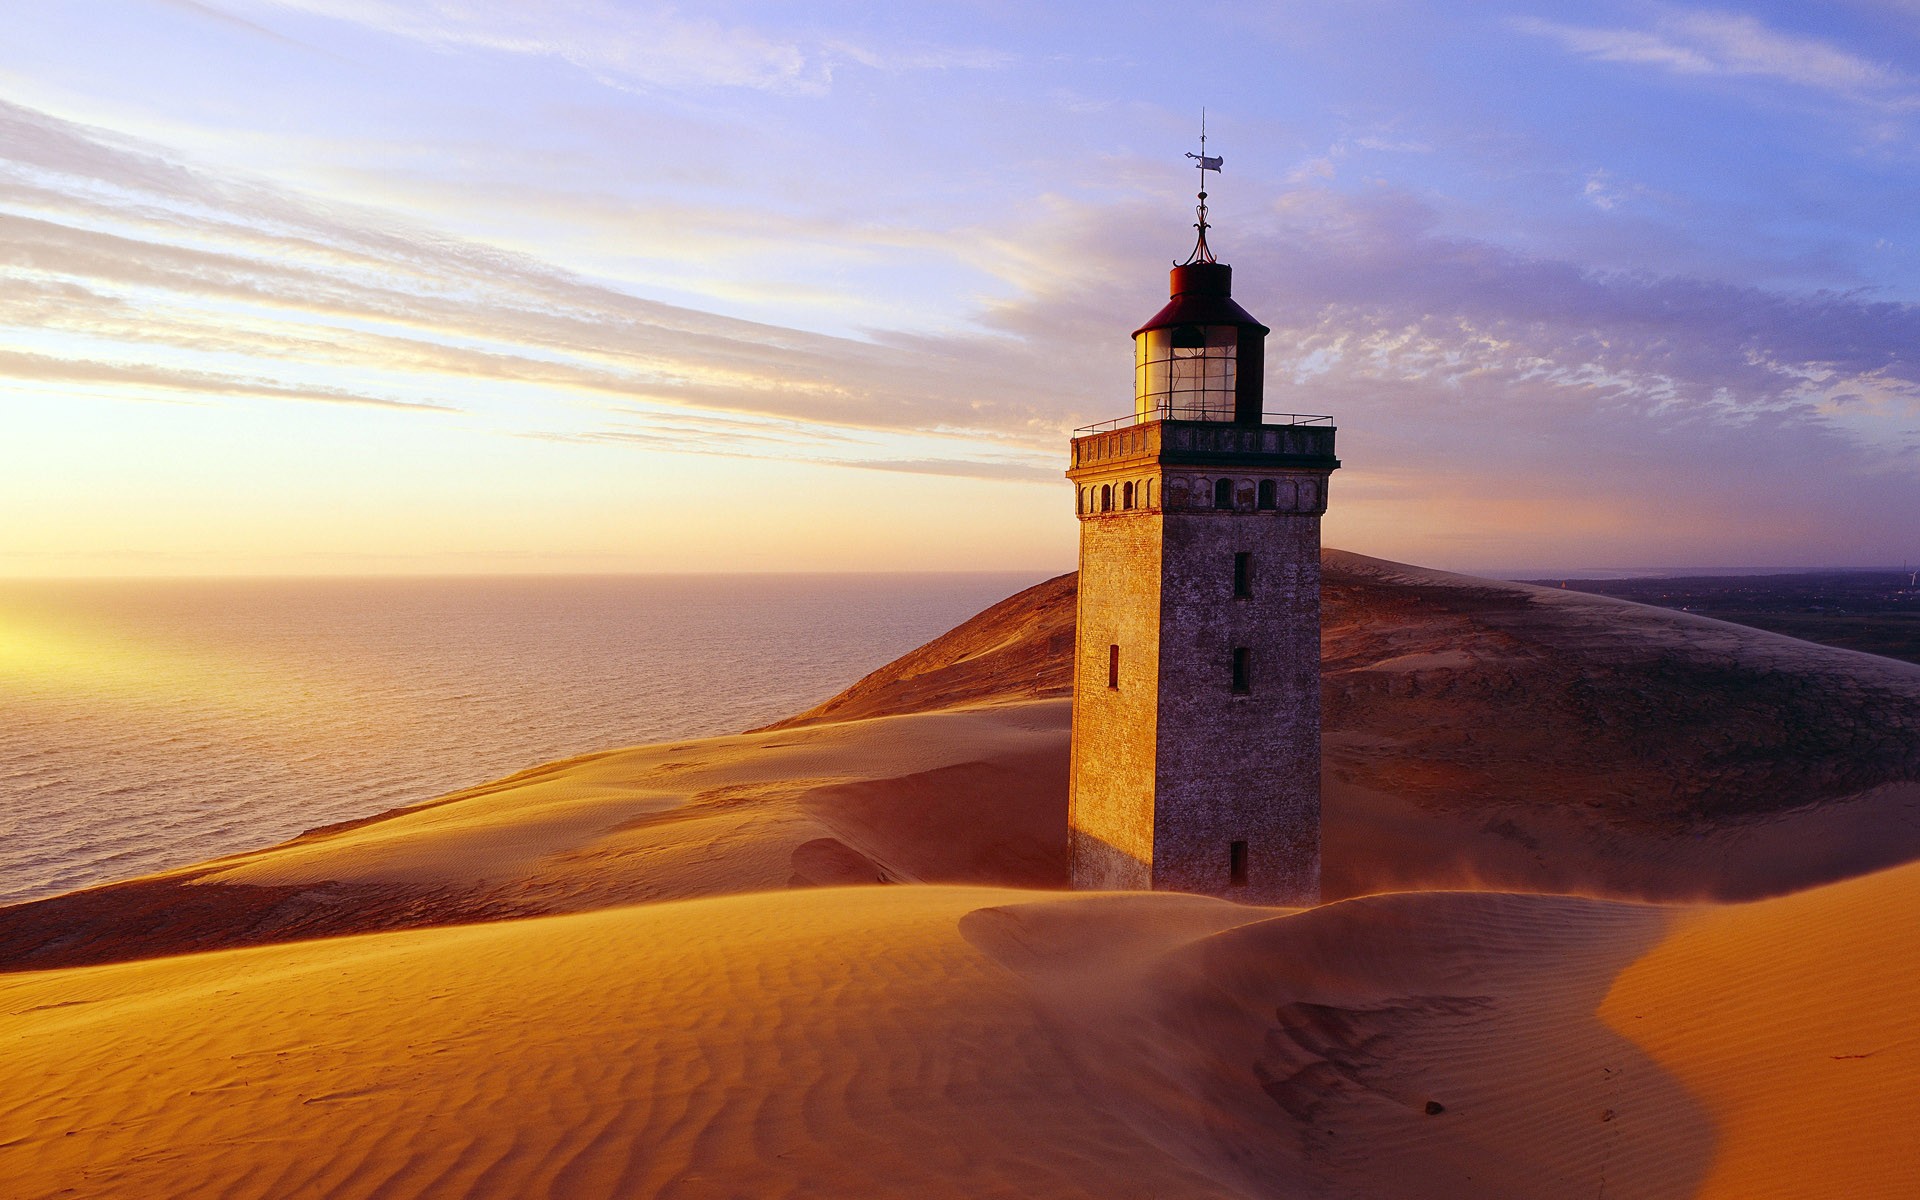 architecture, Buildings, Lighthouse, Lamp, Light, Hills, Landscapes, Sand, Dune, Sunset, Sunrise, Scenic, View, Ocean, Sea, Water, Sky, Clouds, Reflection, Glass, Window, Stone Wallpaper